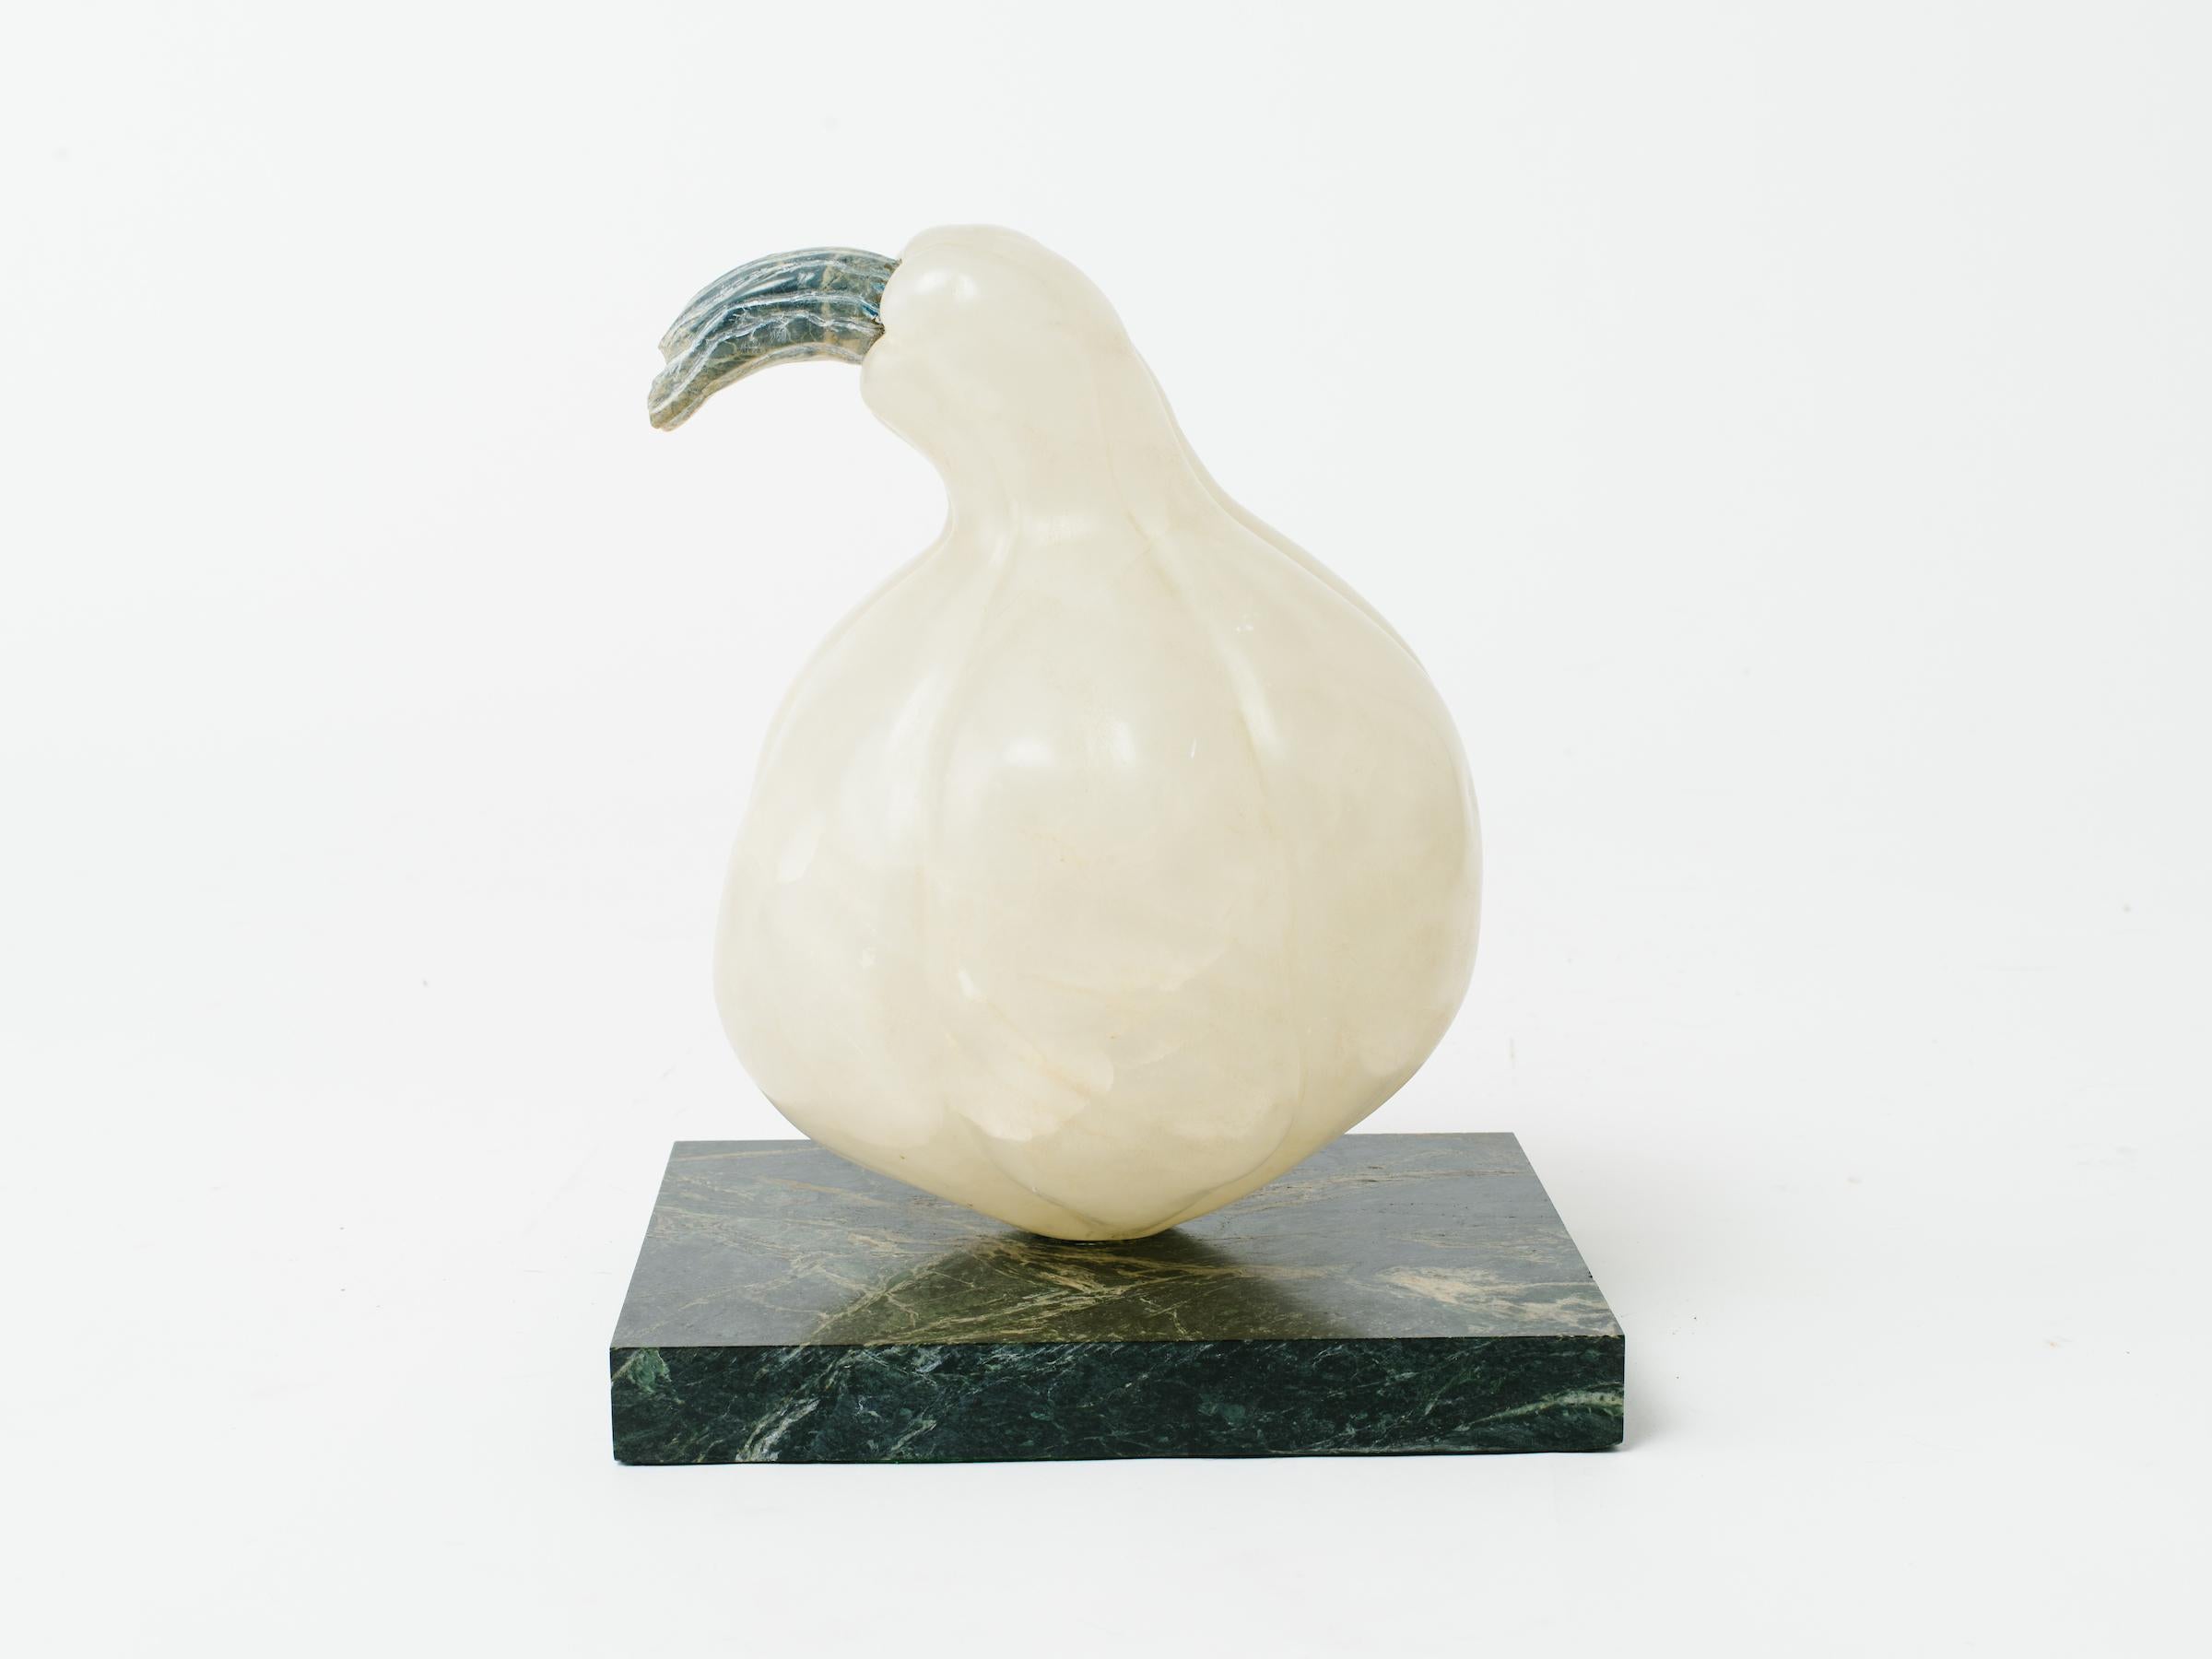 Carved marble gourd from the 1970s.